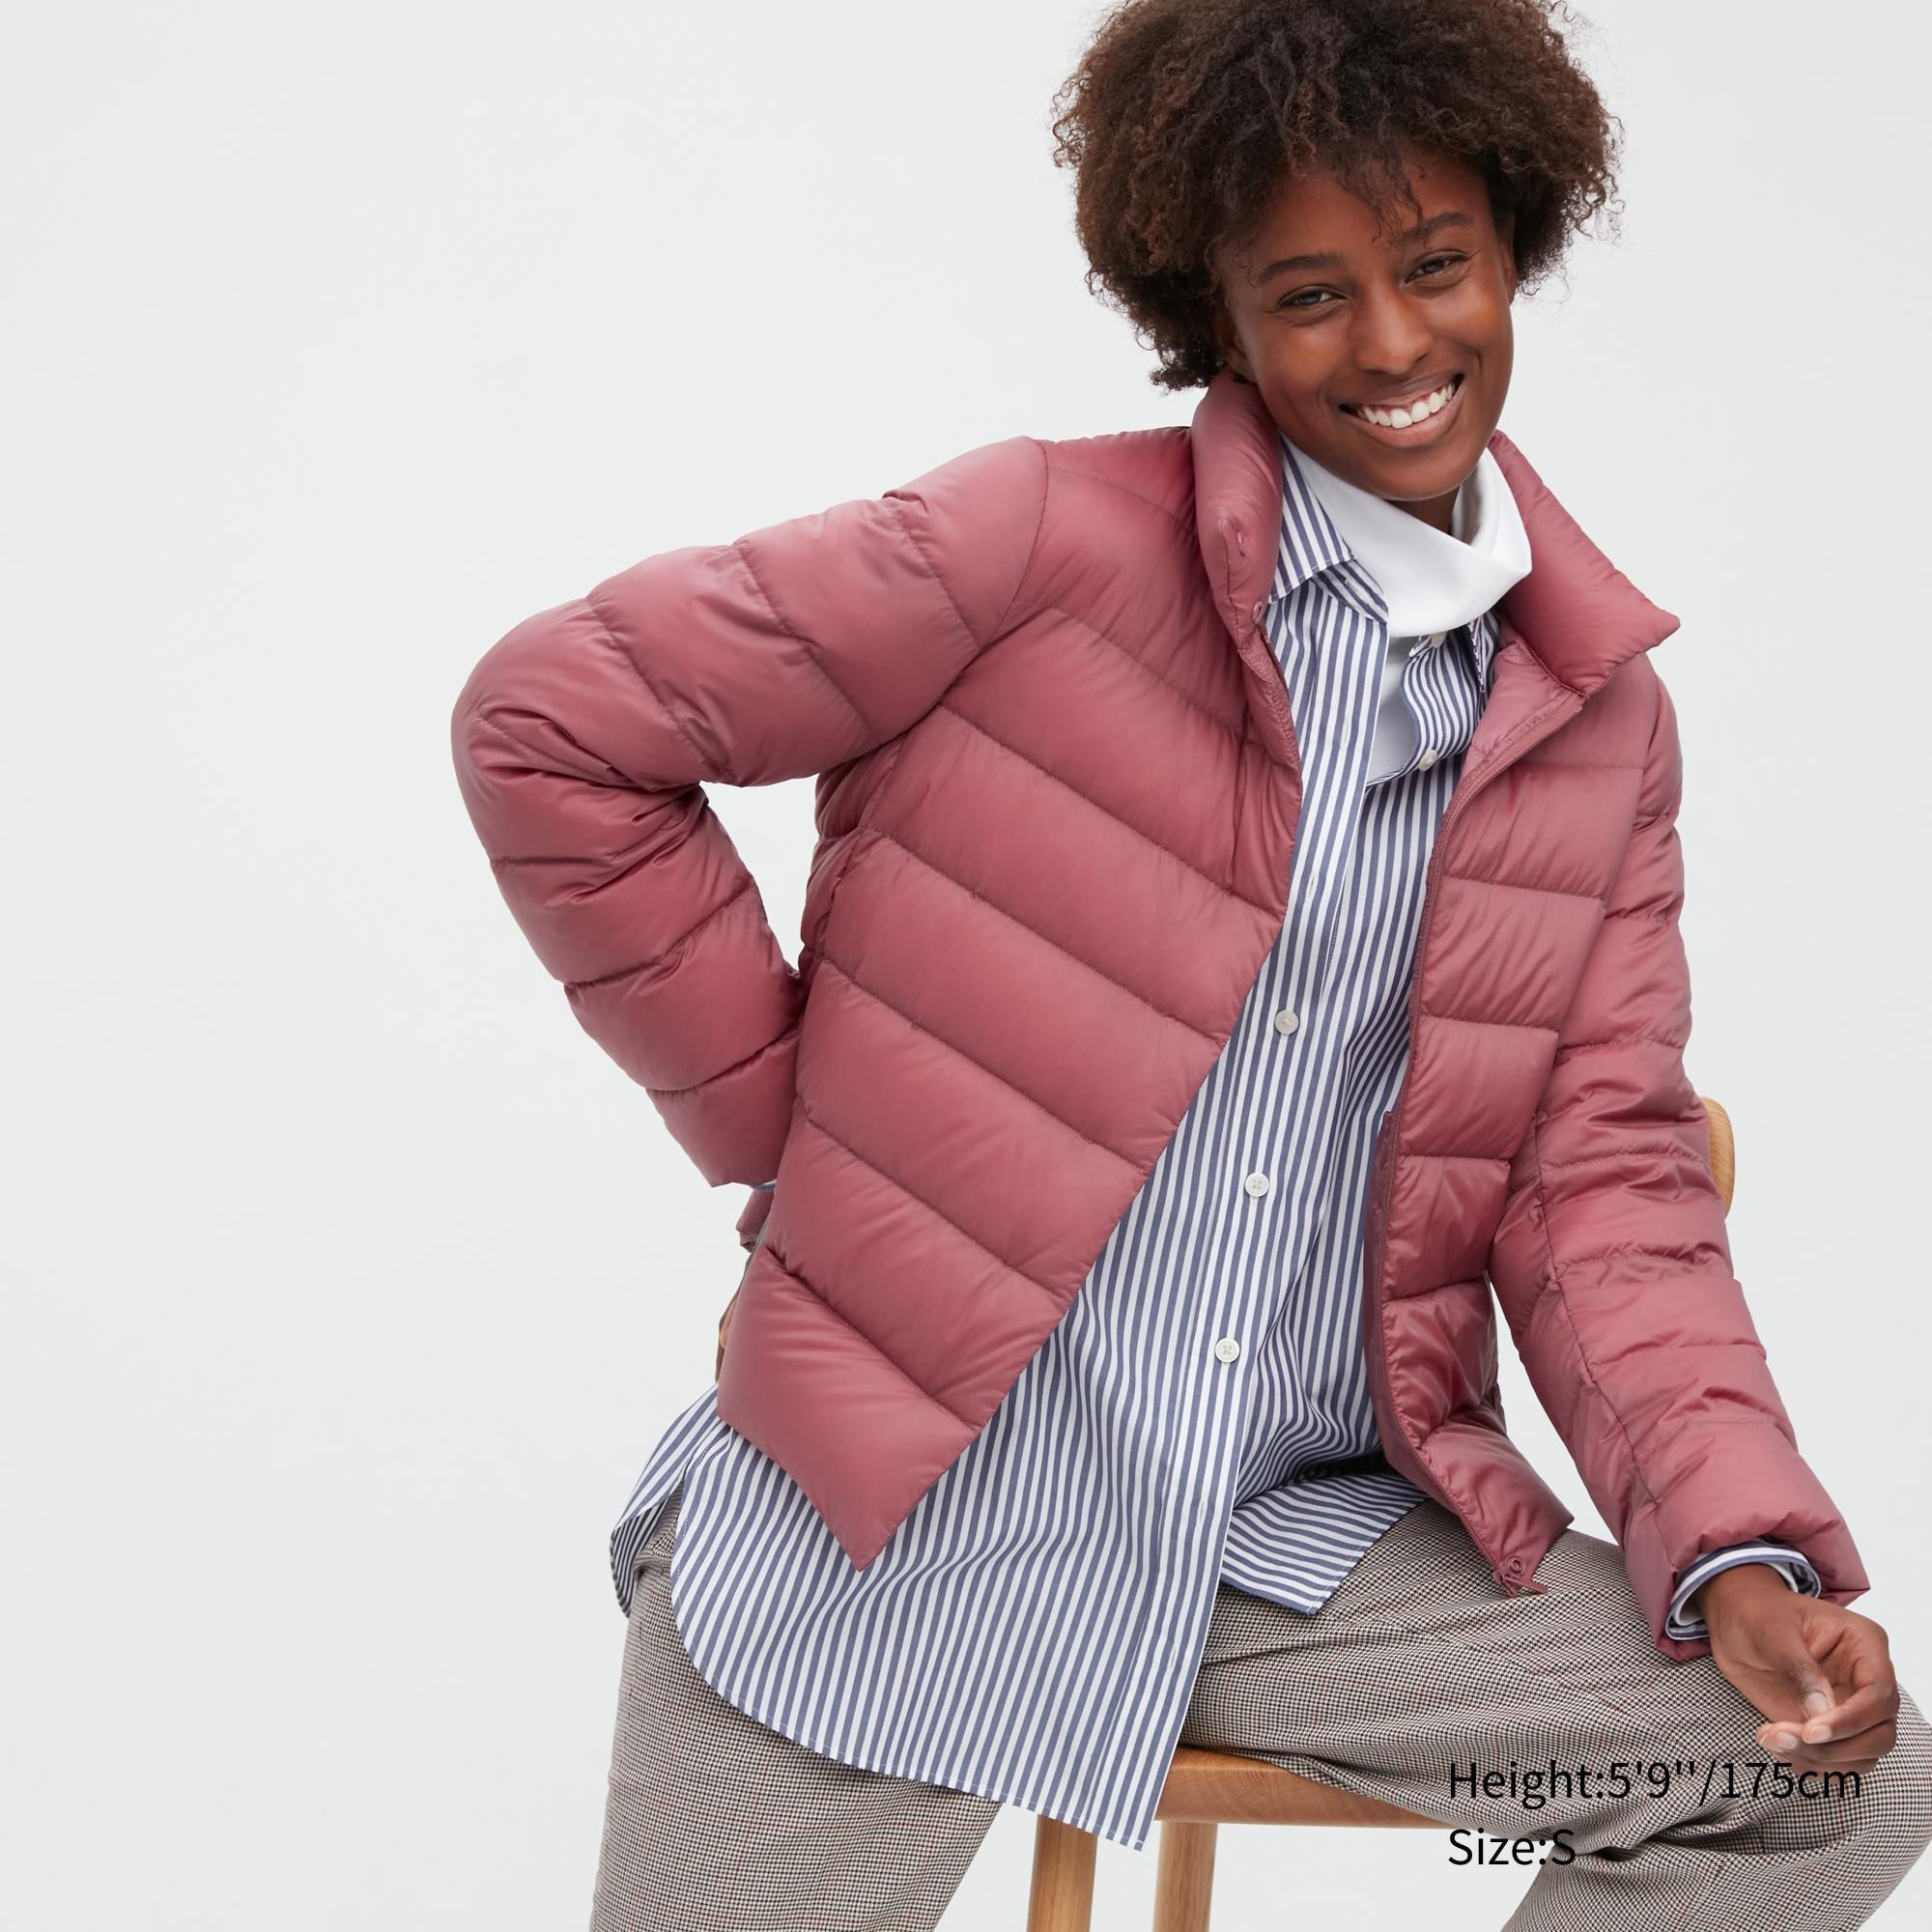 Uniqlo Ultra Light Down Jacket The Perfect Travel Jacket  The Wildest  Road